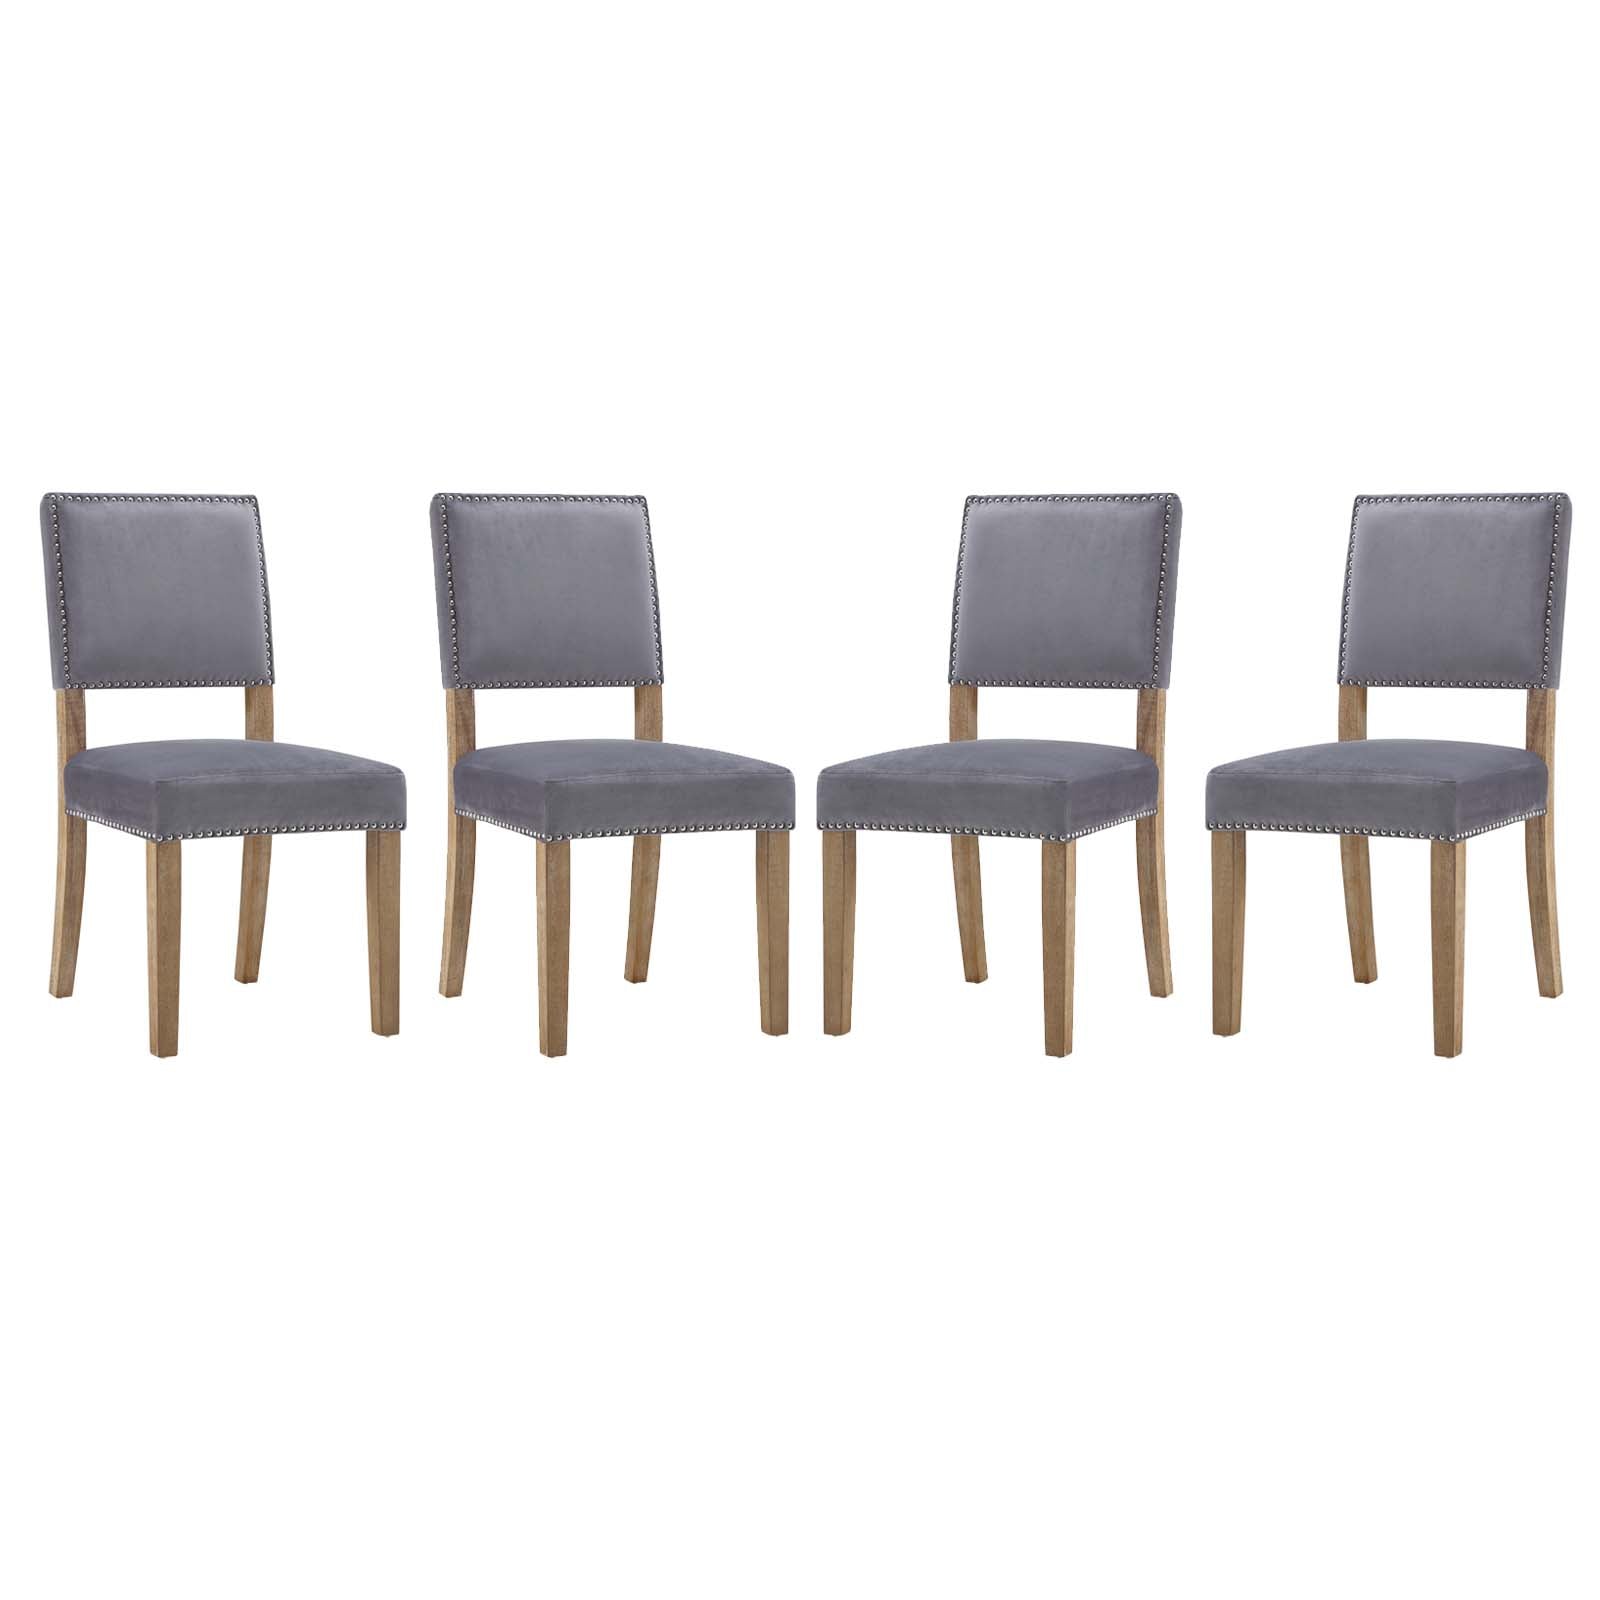 Modway Dining Chairs - Oblige Dining Chair Wood Gray ( Set of 4 )